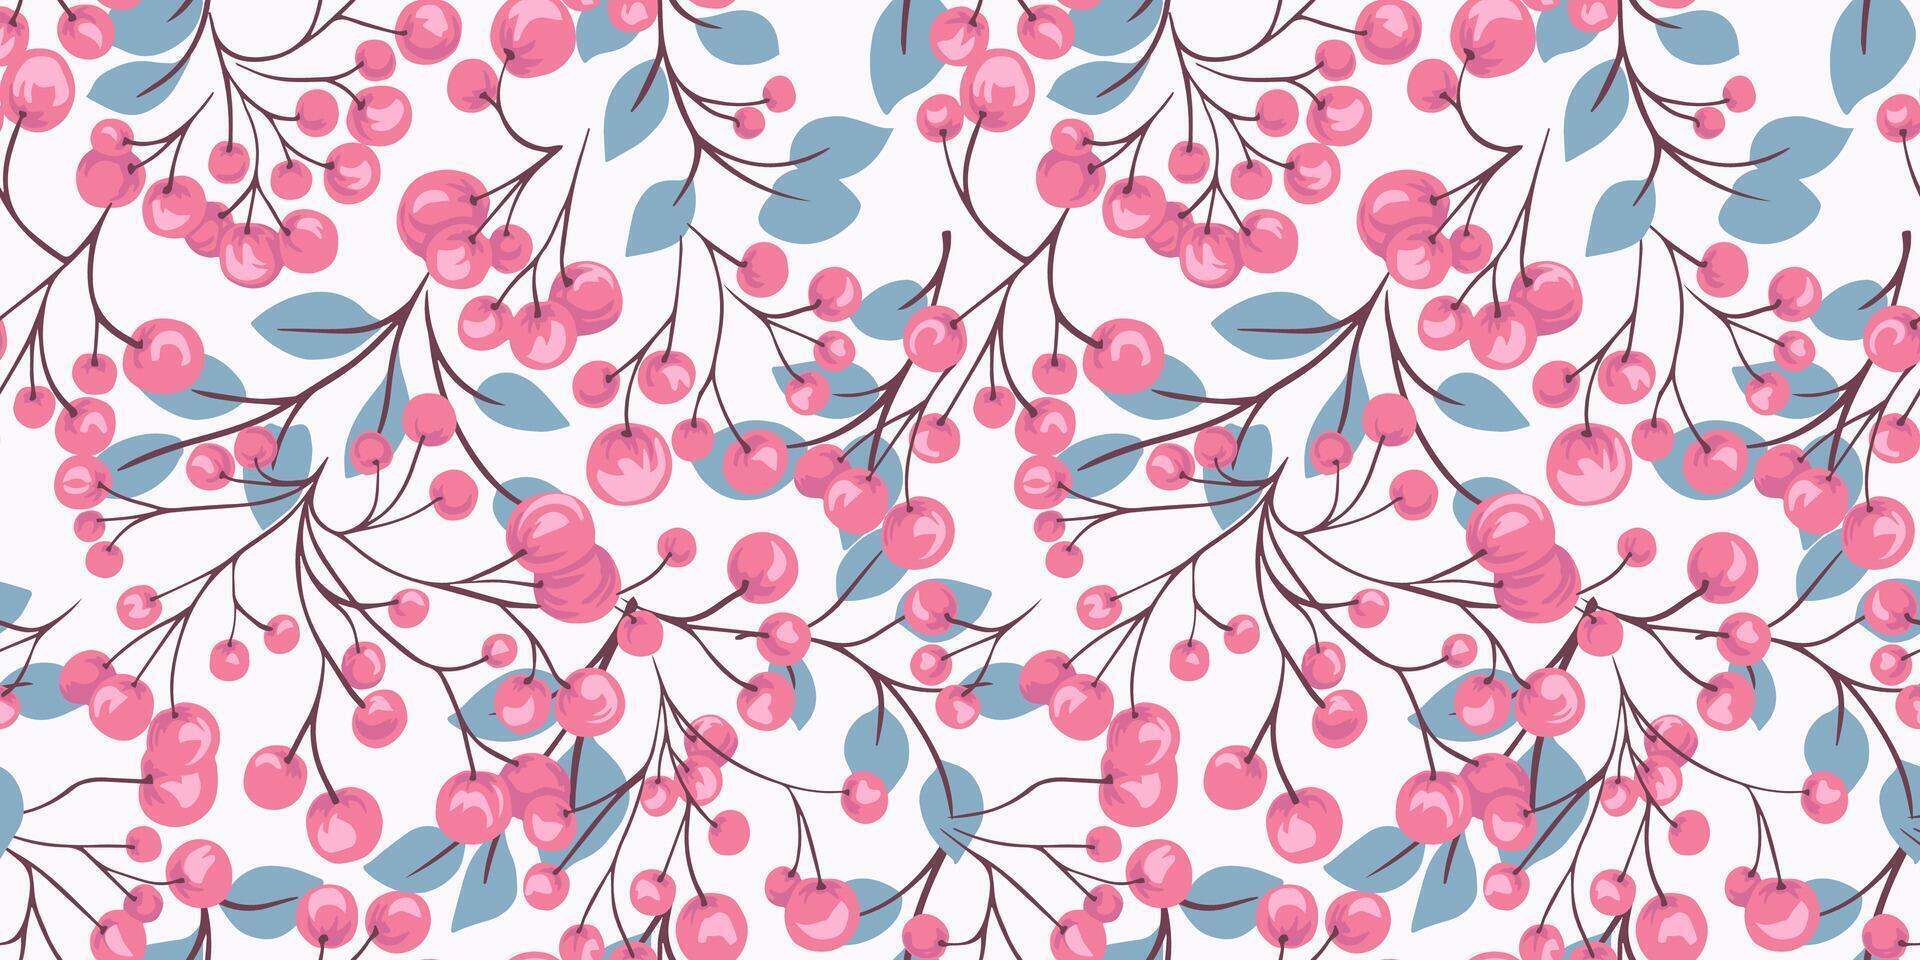 Abstract artistic branches with pink berries intertwined in a seamless pattern. Stylized cute juniper, boxwood, viburnum, dogwood barberry printing. Light botanical illustration. hand drawn. vector